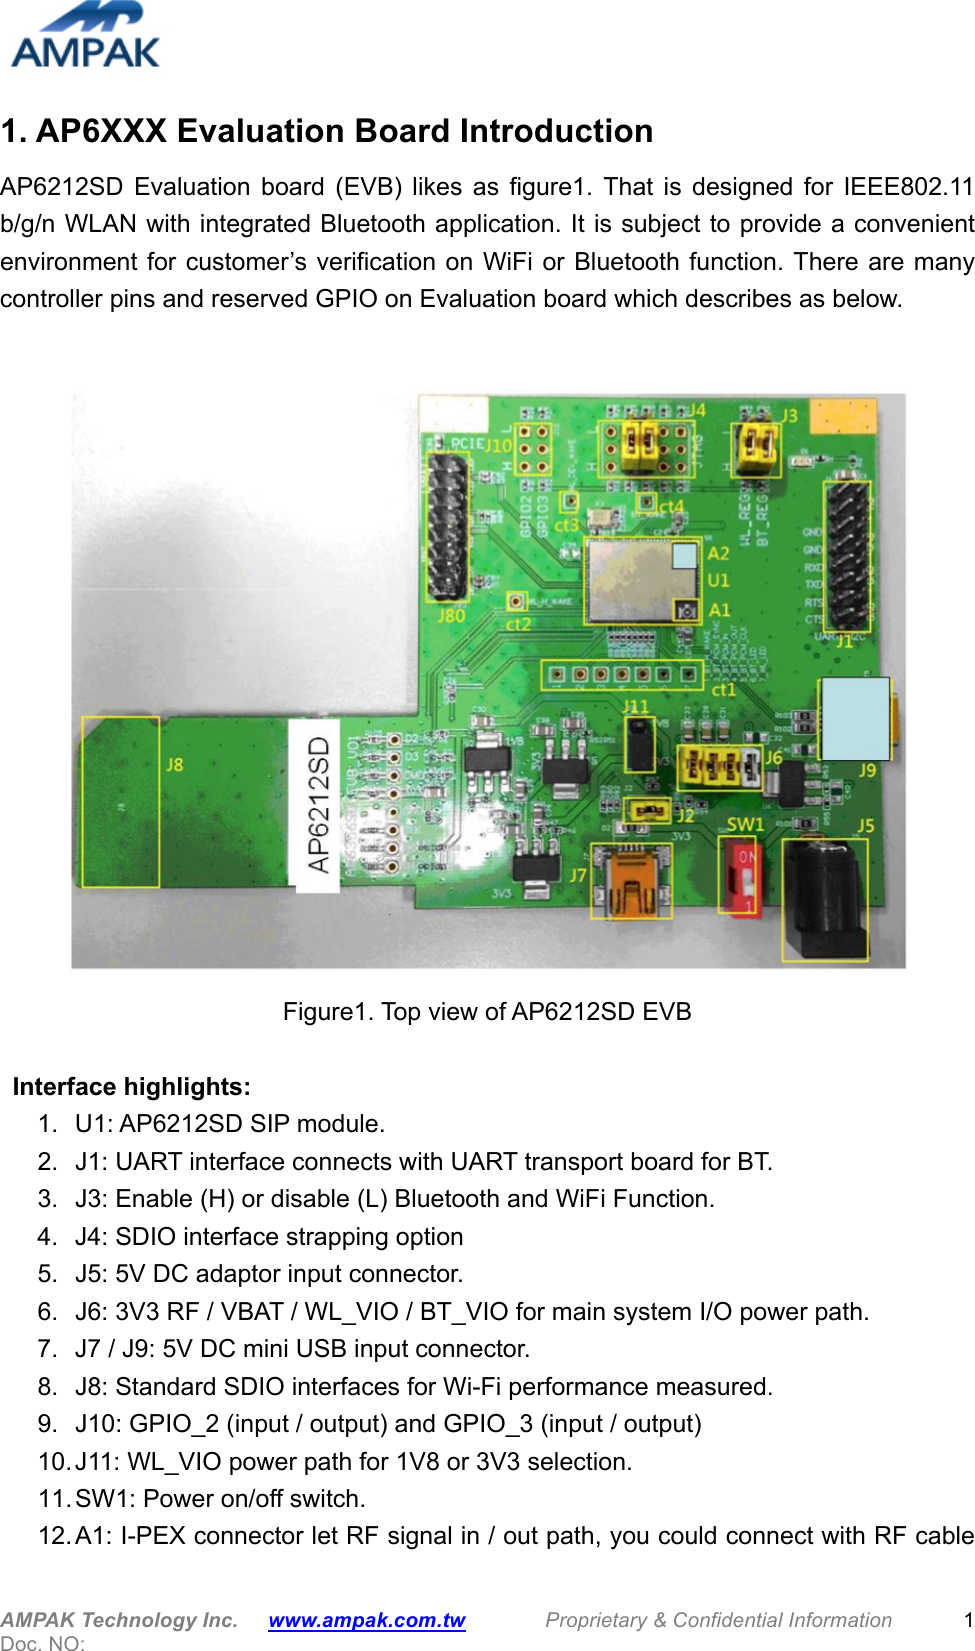  AMPAK Technology Inc.   www.ampak.com.tw        Proprietary &amp; Confidential Information   Doc. NO:   1 1. AP6XXX Evaluation Board Introduction AP6212SD  Evaluation  board  (EVB)  likes  as  figure1.  That  is  designed  for  IEEE802.11 b/g/n WLAN with integrated Bluetooth application. It is subject to provide a convenient environment for  customer’s verification on WiFi  or Bluetooth function.  There are many controller pins and reserved GPIO on Evaluation board which describes as below.   Figure1. Top view of AP6212SD EVB    Interface highlights: 1.  U1: AP6212SD SIP module. 2.  J1: UART interface connects with UART transport board for BT. 3.  J3: Enable (H) or disable (L) Bluetooth and WiFi Function. 4.  J4: SDIO interface strapping option 5.  J5: 5V DC adaptor input connector. 6.  J6: 3V3 RF / VBAT / WL_VIO / BT_VIO for main system I/O power path. 7.  J7 / J9: 5V DC mini USB input connector. 8.  J8: Standard SDIO interfaces for Wi-Fi performance measured. 9.  J10: GPIO_2 (input / output) and GPIO_3 (input / output) 10. J11: WL_VIO power path for 1V8 or 3V3 selection. 11. SW1: Power on/off switch. 12. A1: I-PEX connector let RF signal in / out path, you could connect with RF cable 